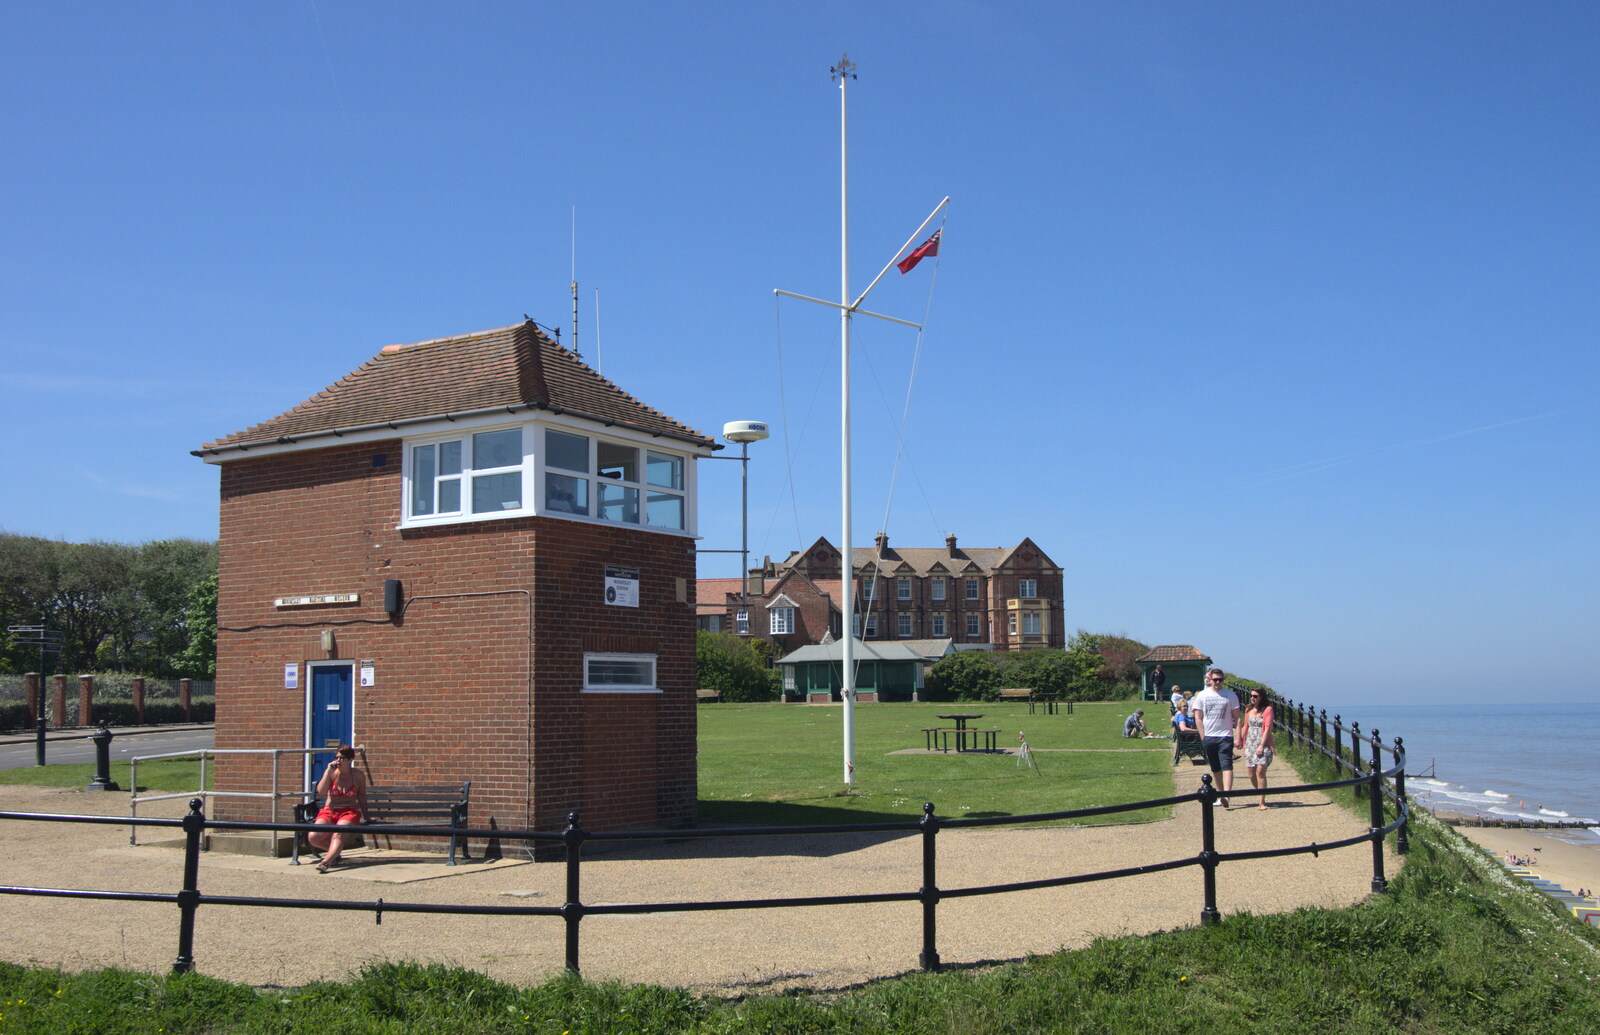 The Mundesley coastguard station from The BSCC at Needham, and a Birthday By The Sea, Cley, Norfolk - 26th May 2012